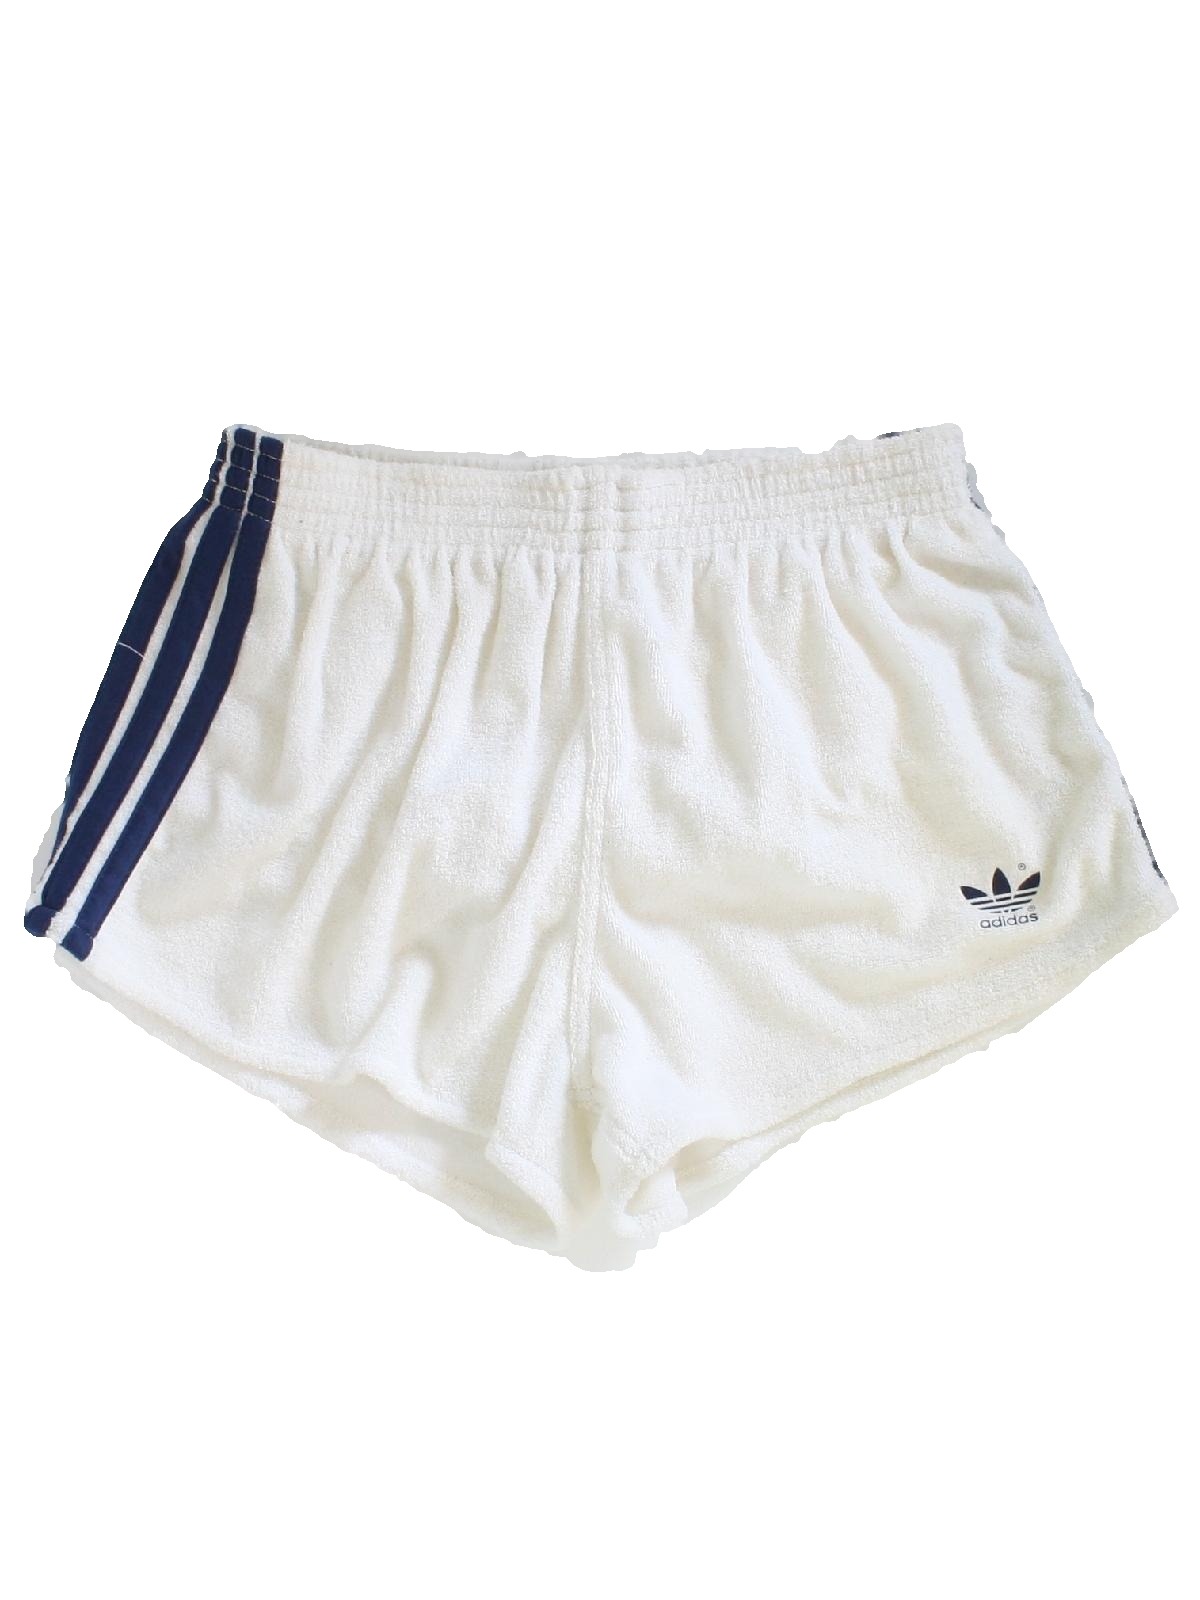 70s Vintage Adidas Shorts: Late 70s or Early 80s -Adidas- Mens